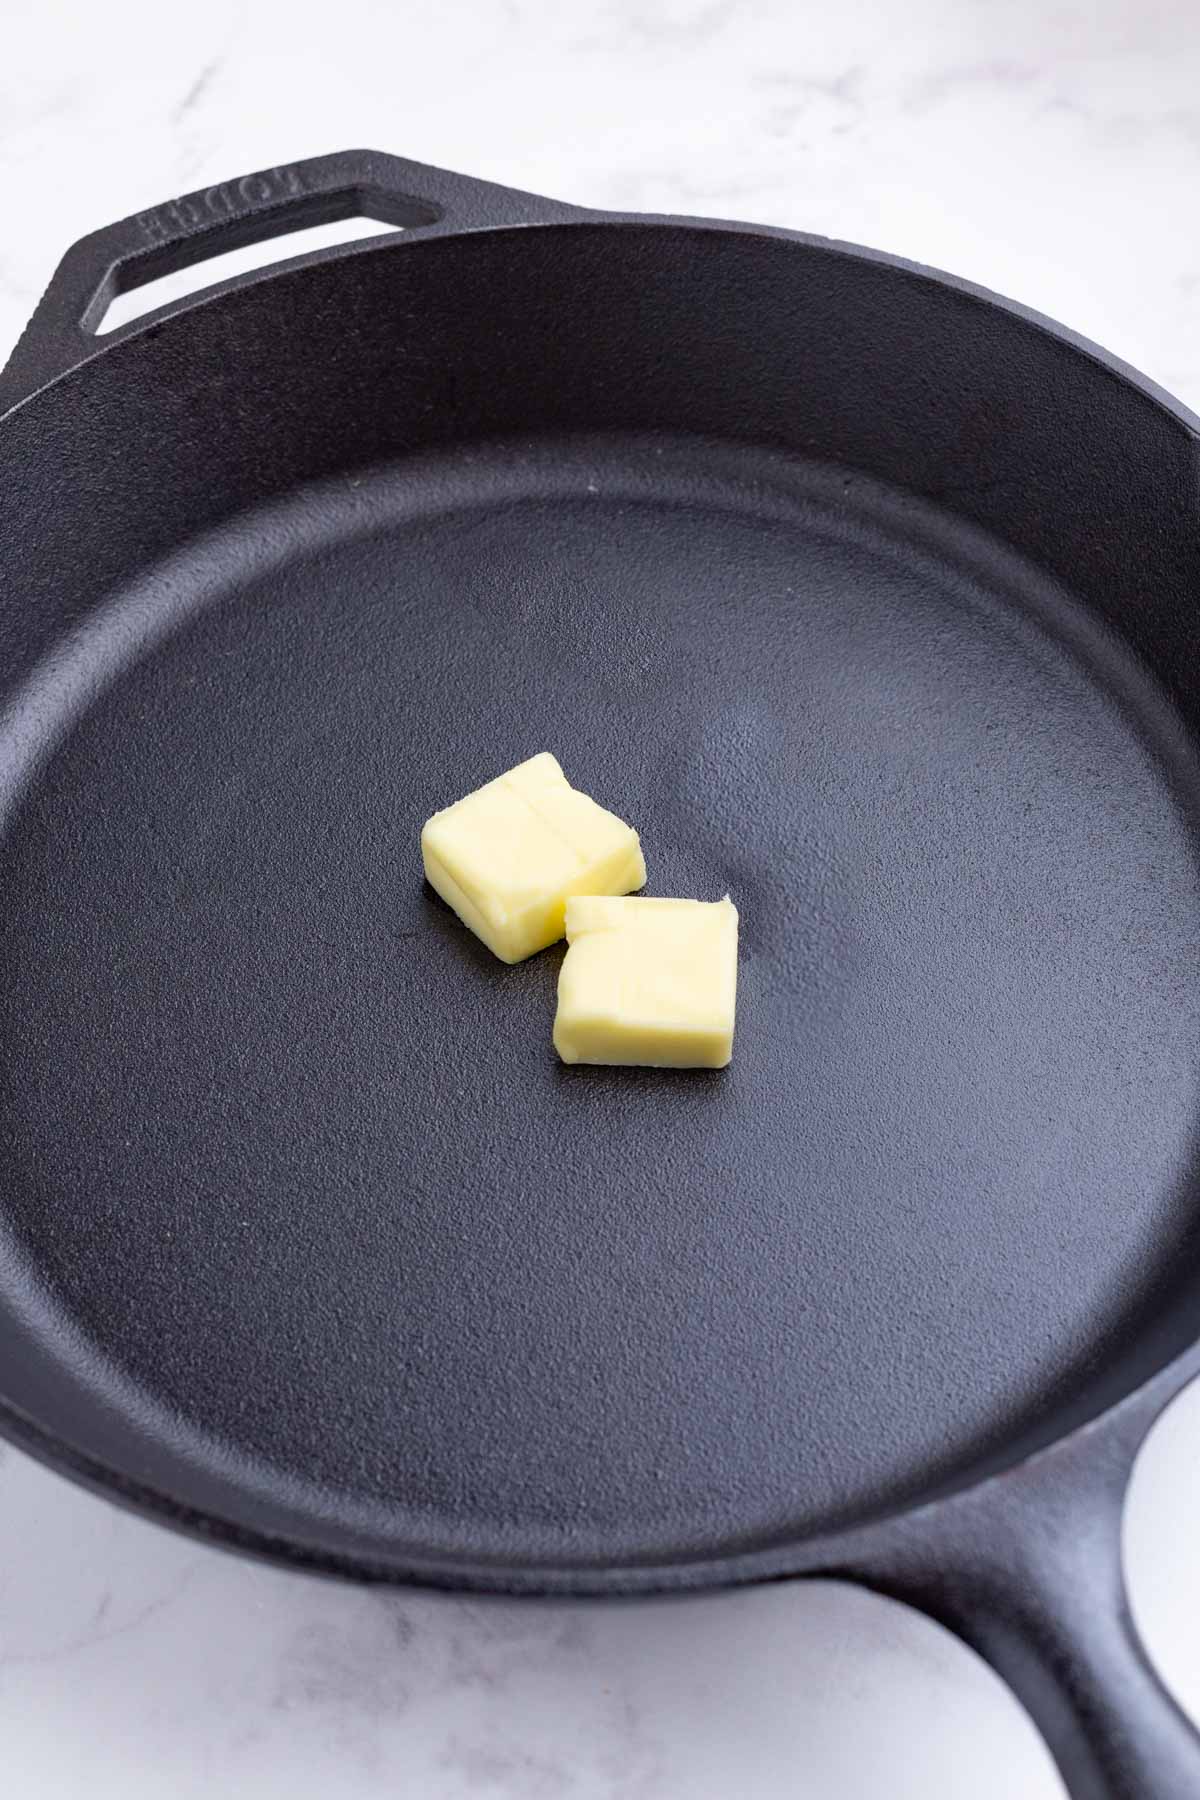 Butter is added to a cast iron skillet.